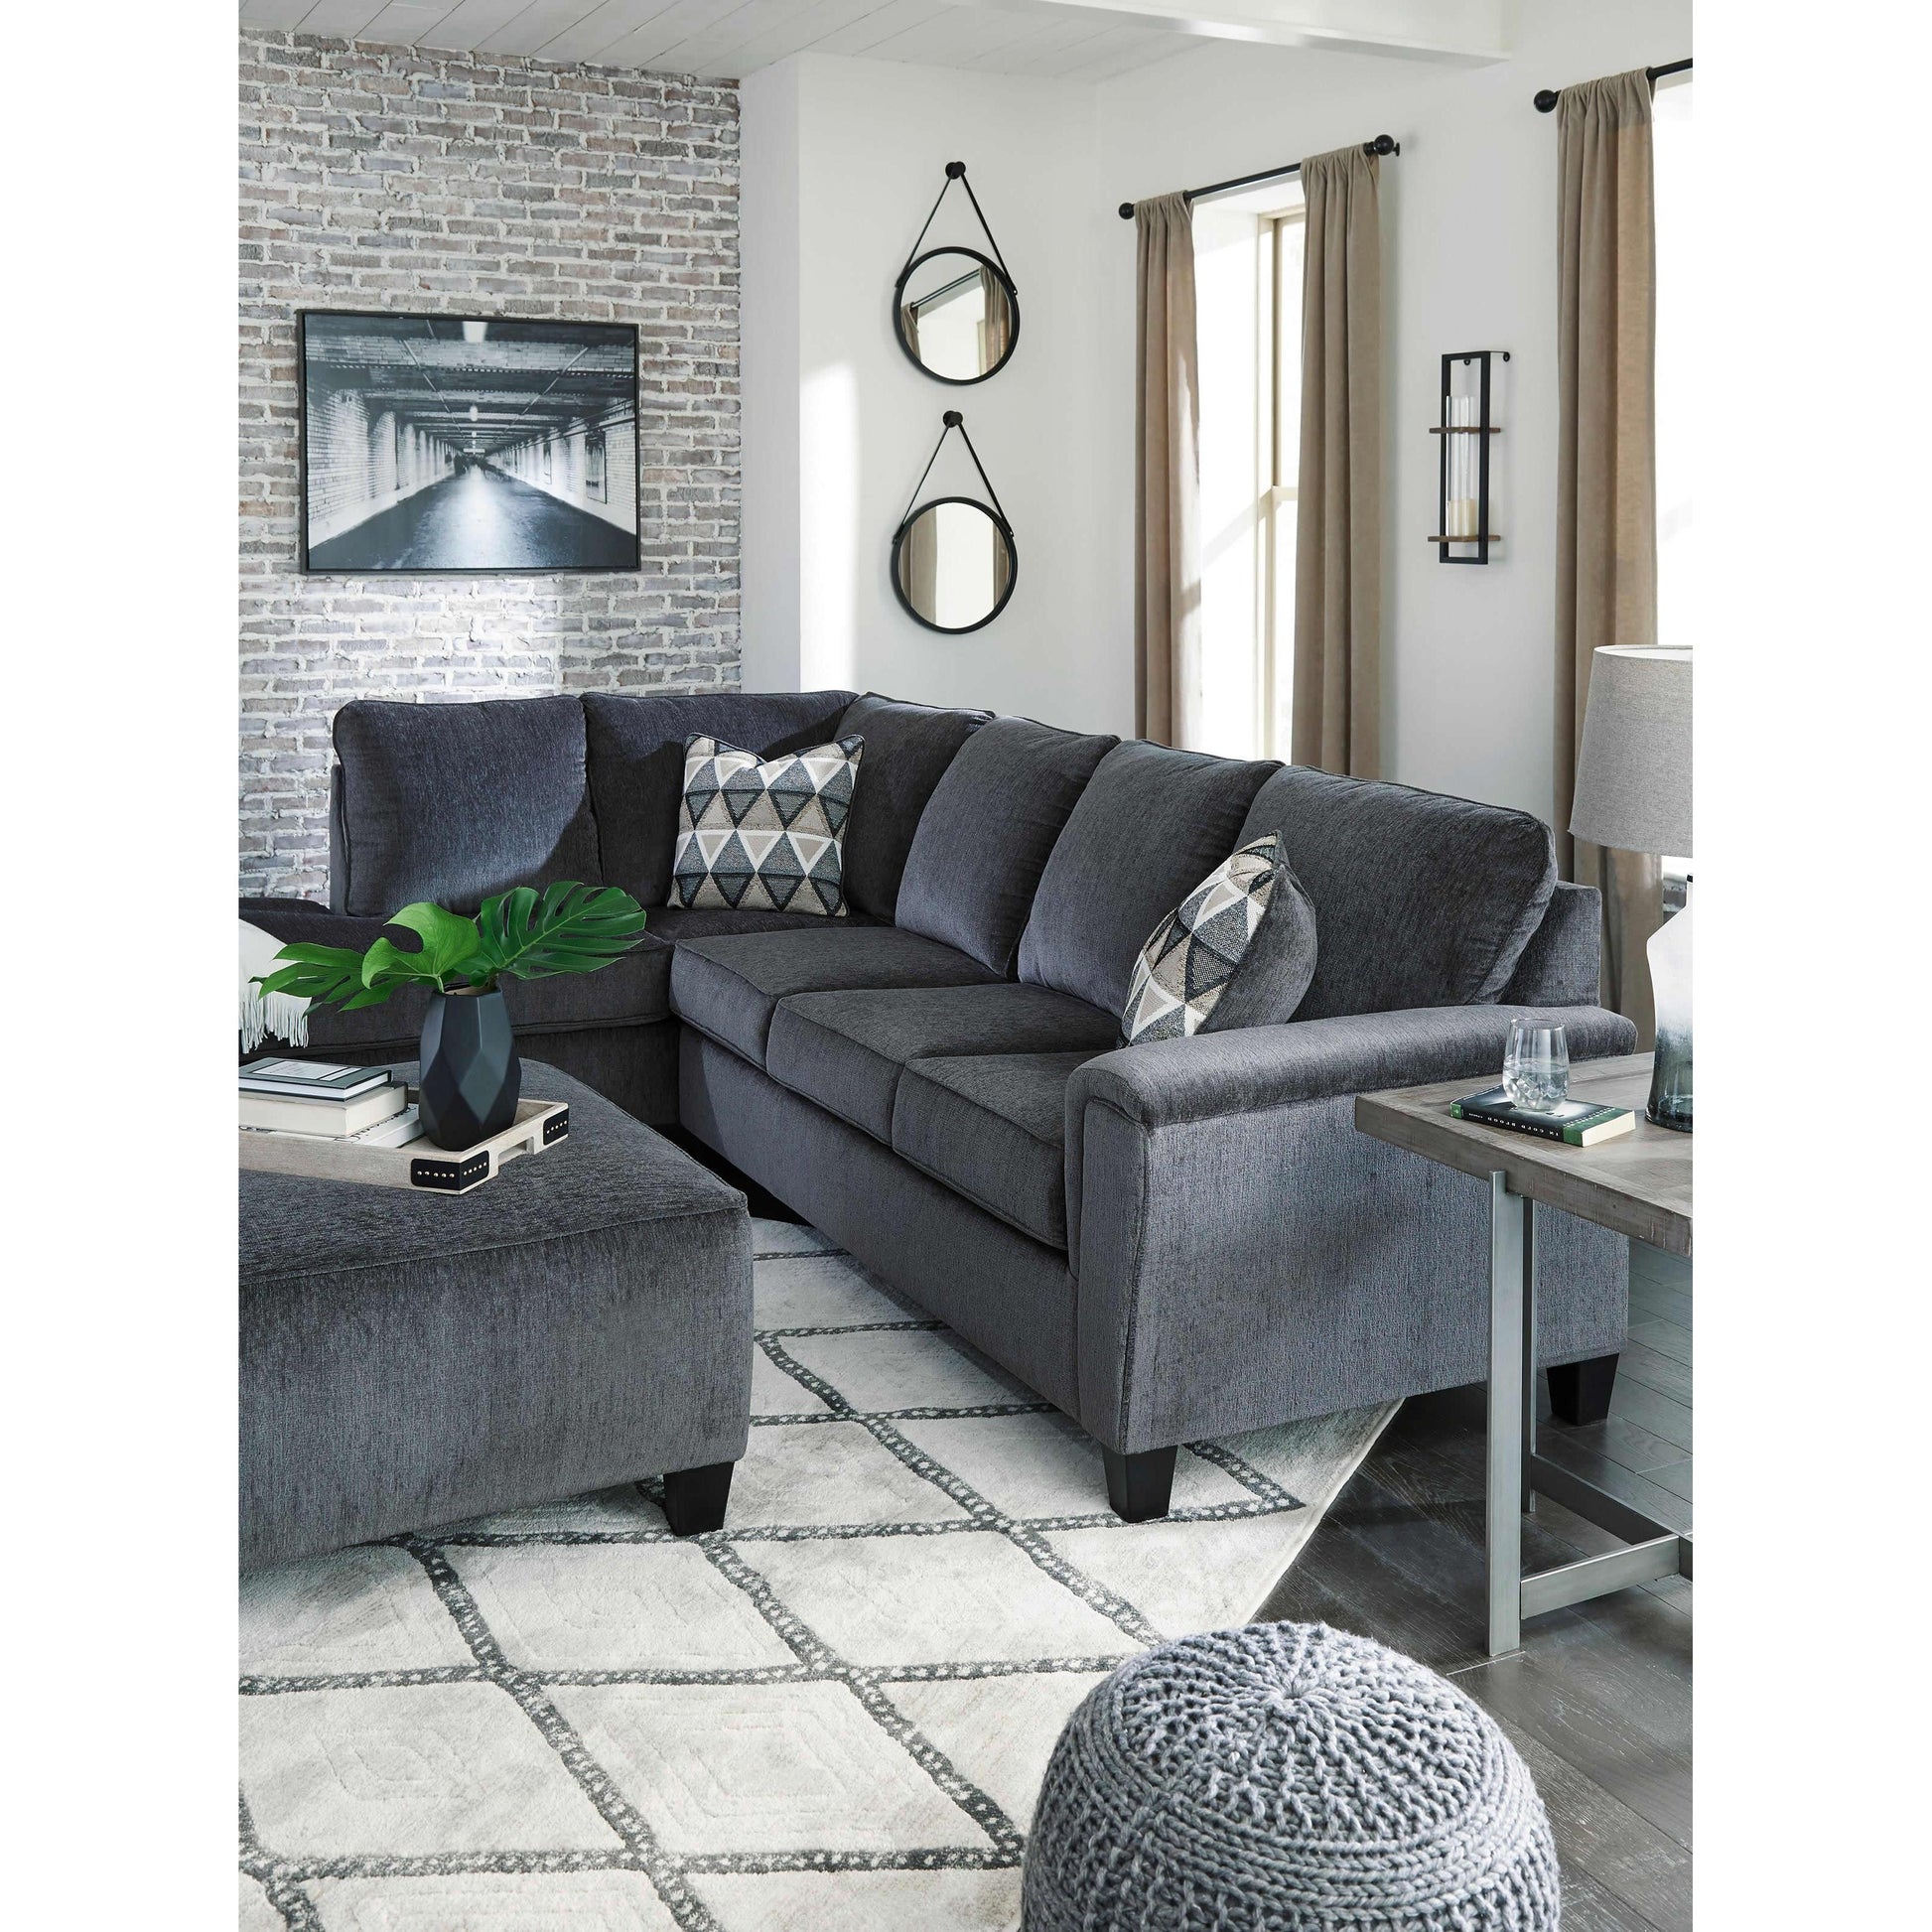 Signature Design by Ashley Abinger Fabric Queen Sleeper Sectional 8390516/8390570 IMAGE 6